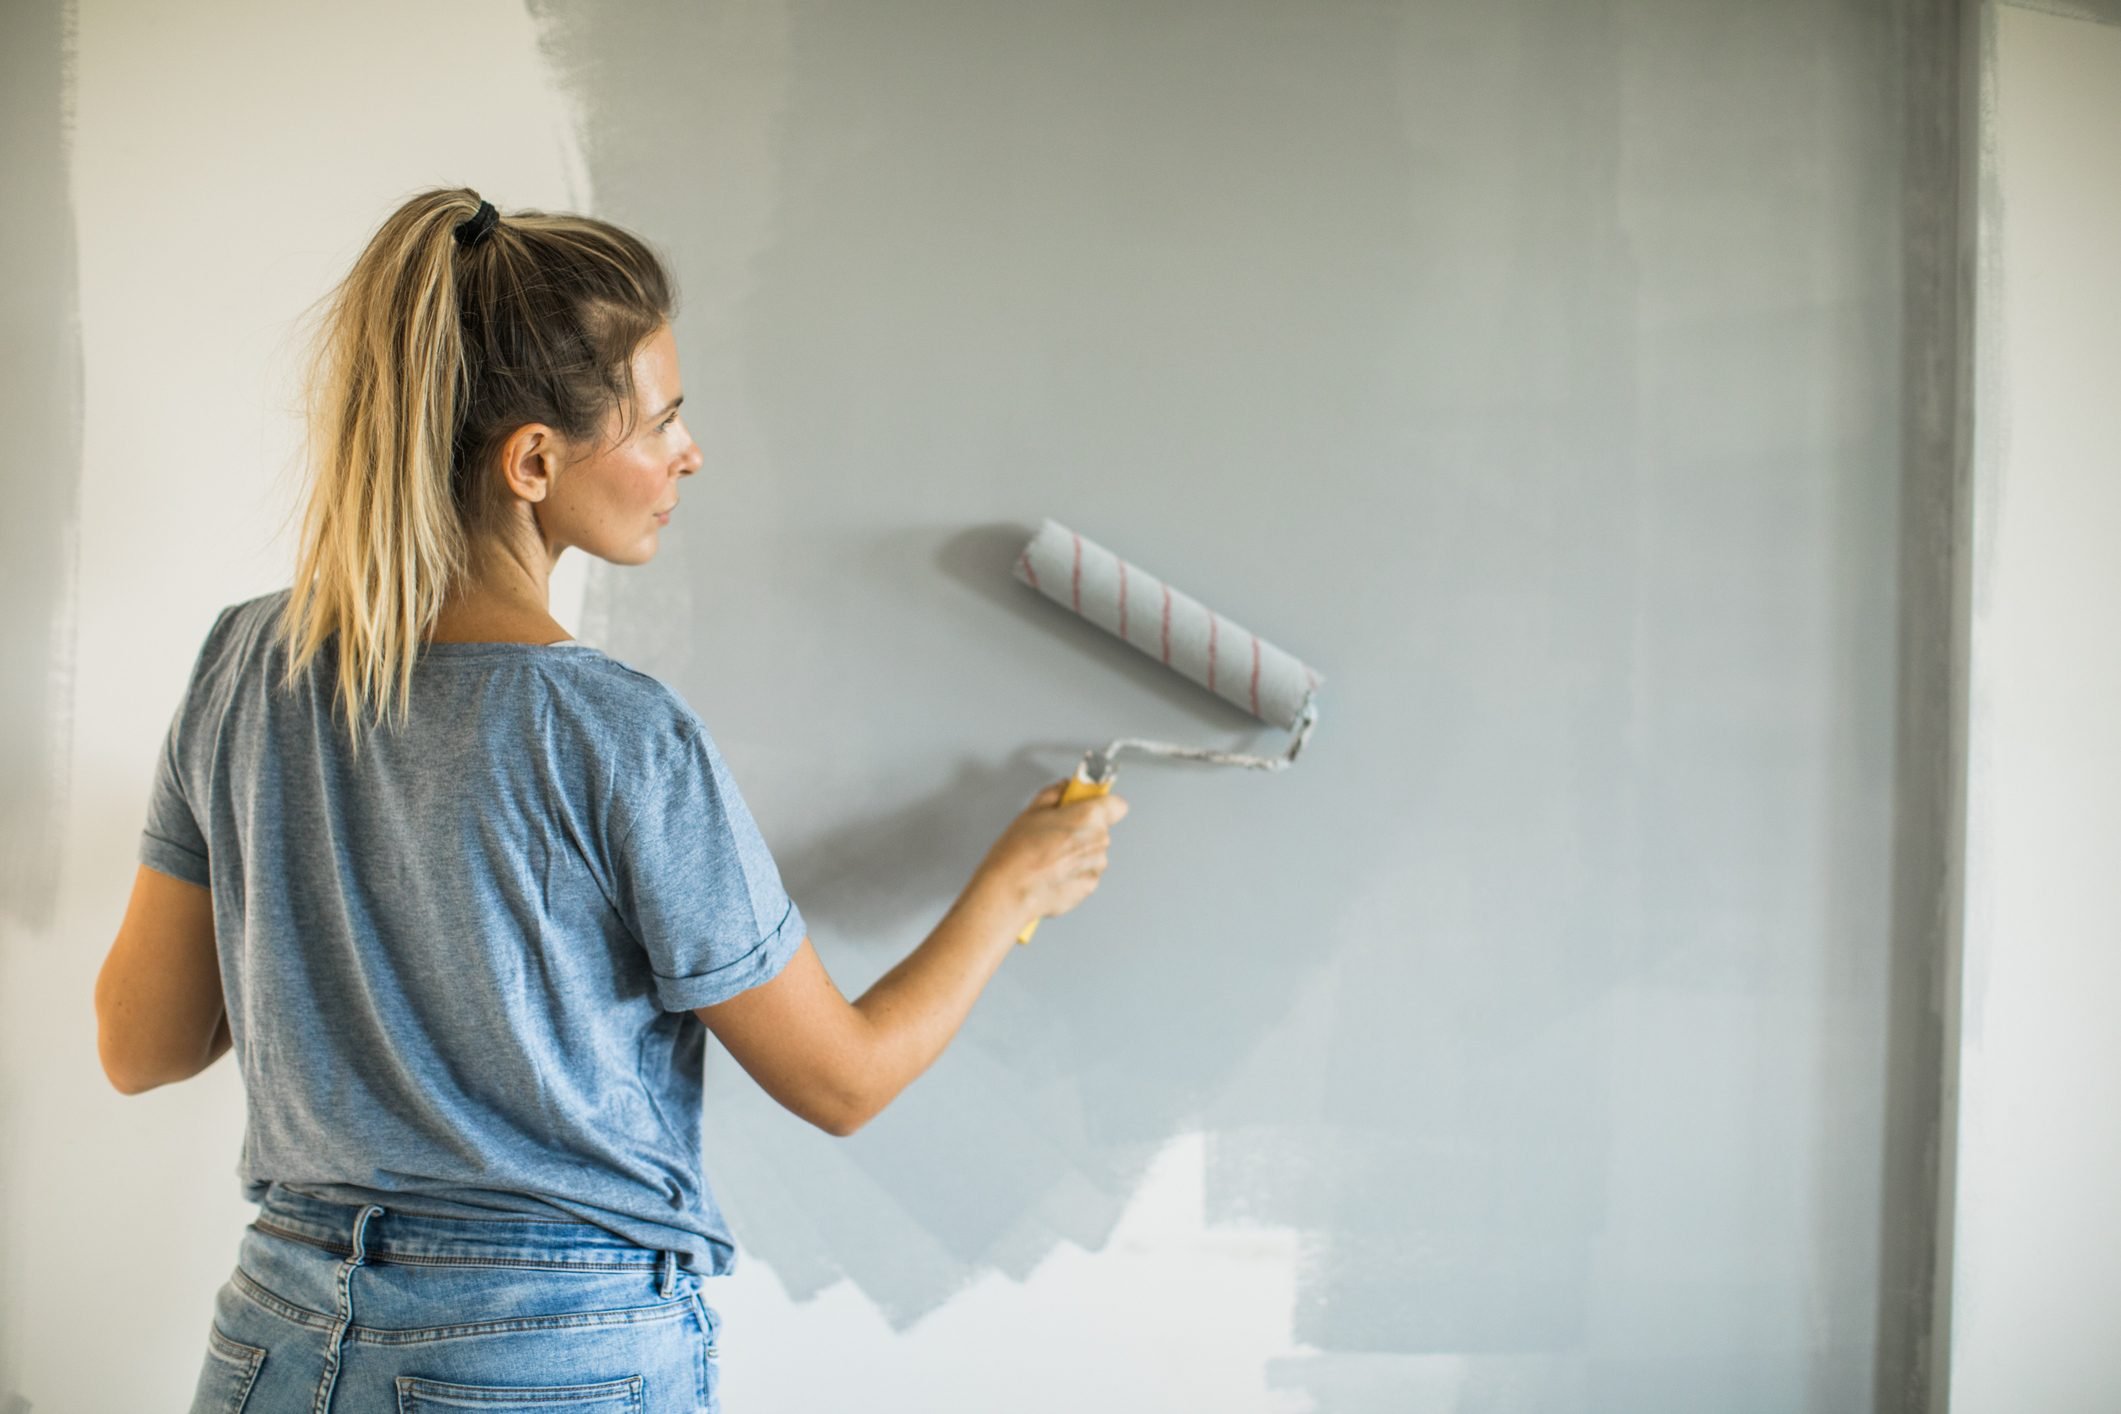 10 Paint Roller Techniques and Tips for Perfect Walls